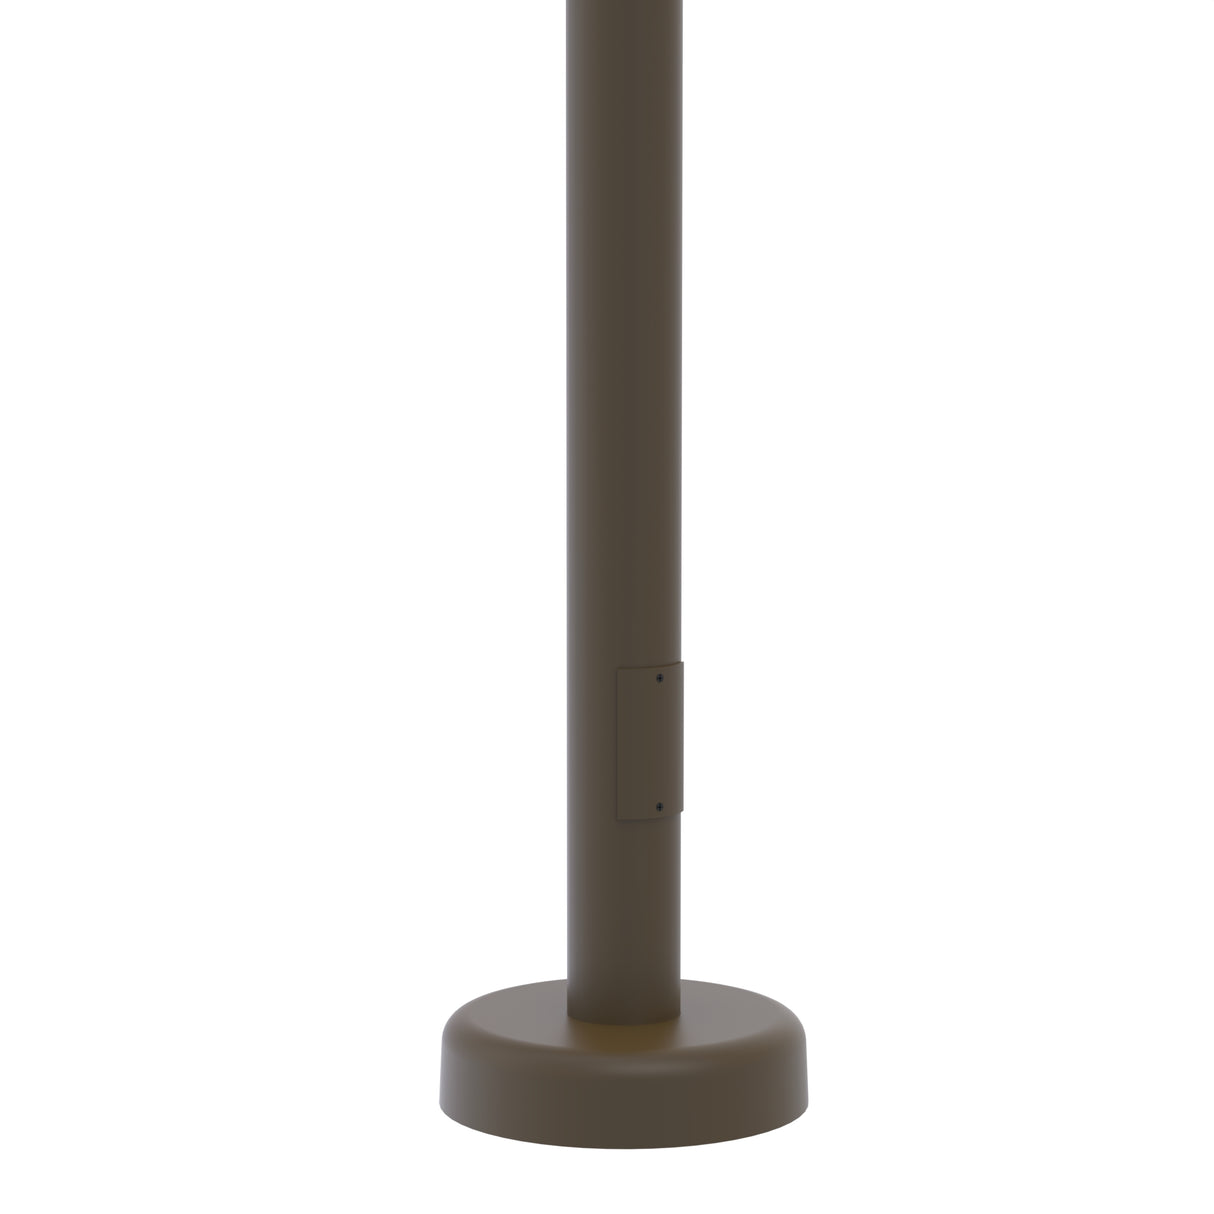 14' Tall x 5.0" OD x 0.188" Thick, Round Straight Aluminum, Hinged Anchor Base Light Pole